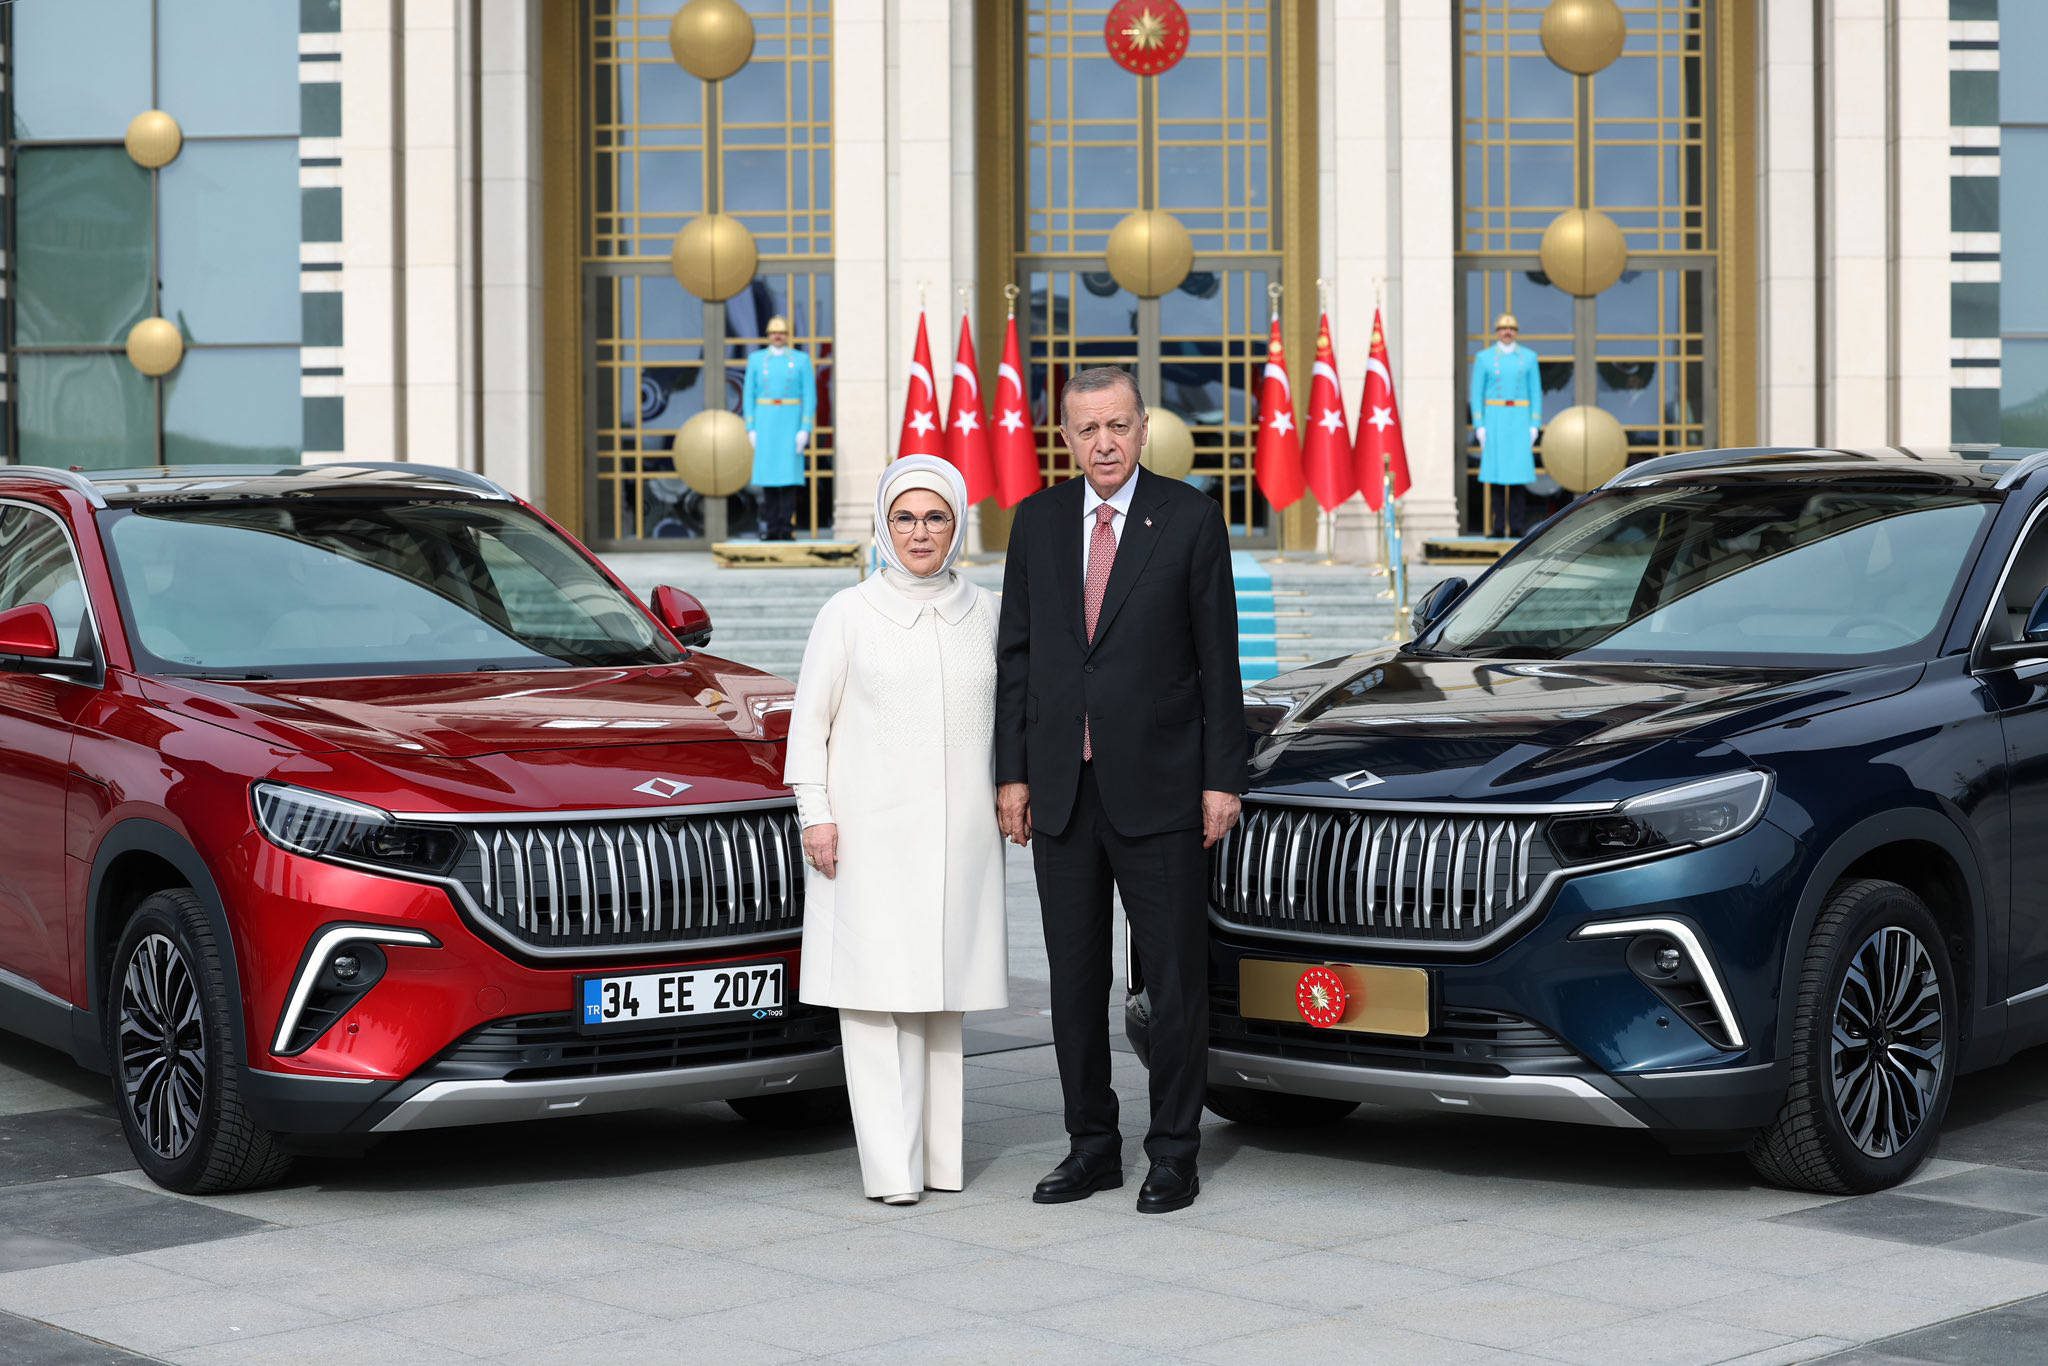 President Erdogan and his wife Emine received his Togg T10X, Turkey's first domestically-produced electric car, in April